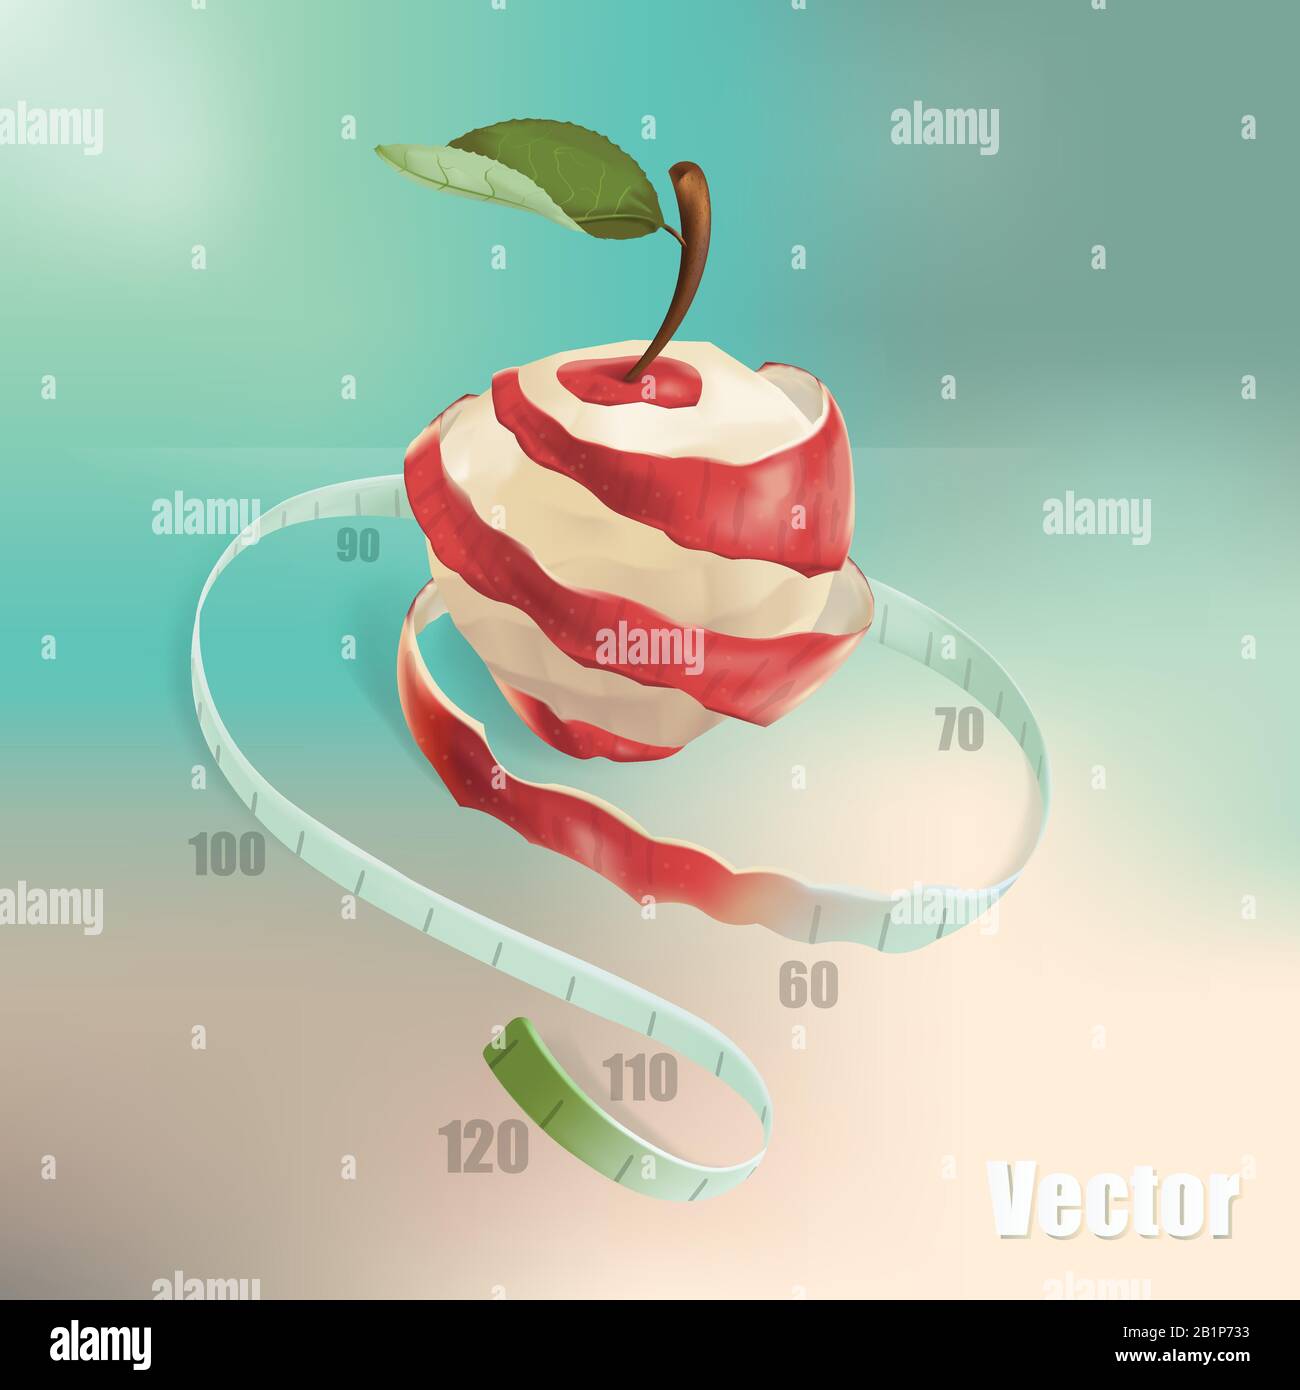 The illustration shows a red apple, which was cut in a spiral. The spiral passes into the measuring tape. This is a symbol of weight loss, diet, healt Stock Vector